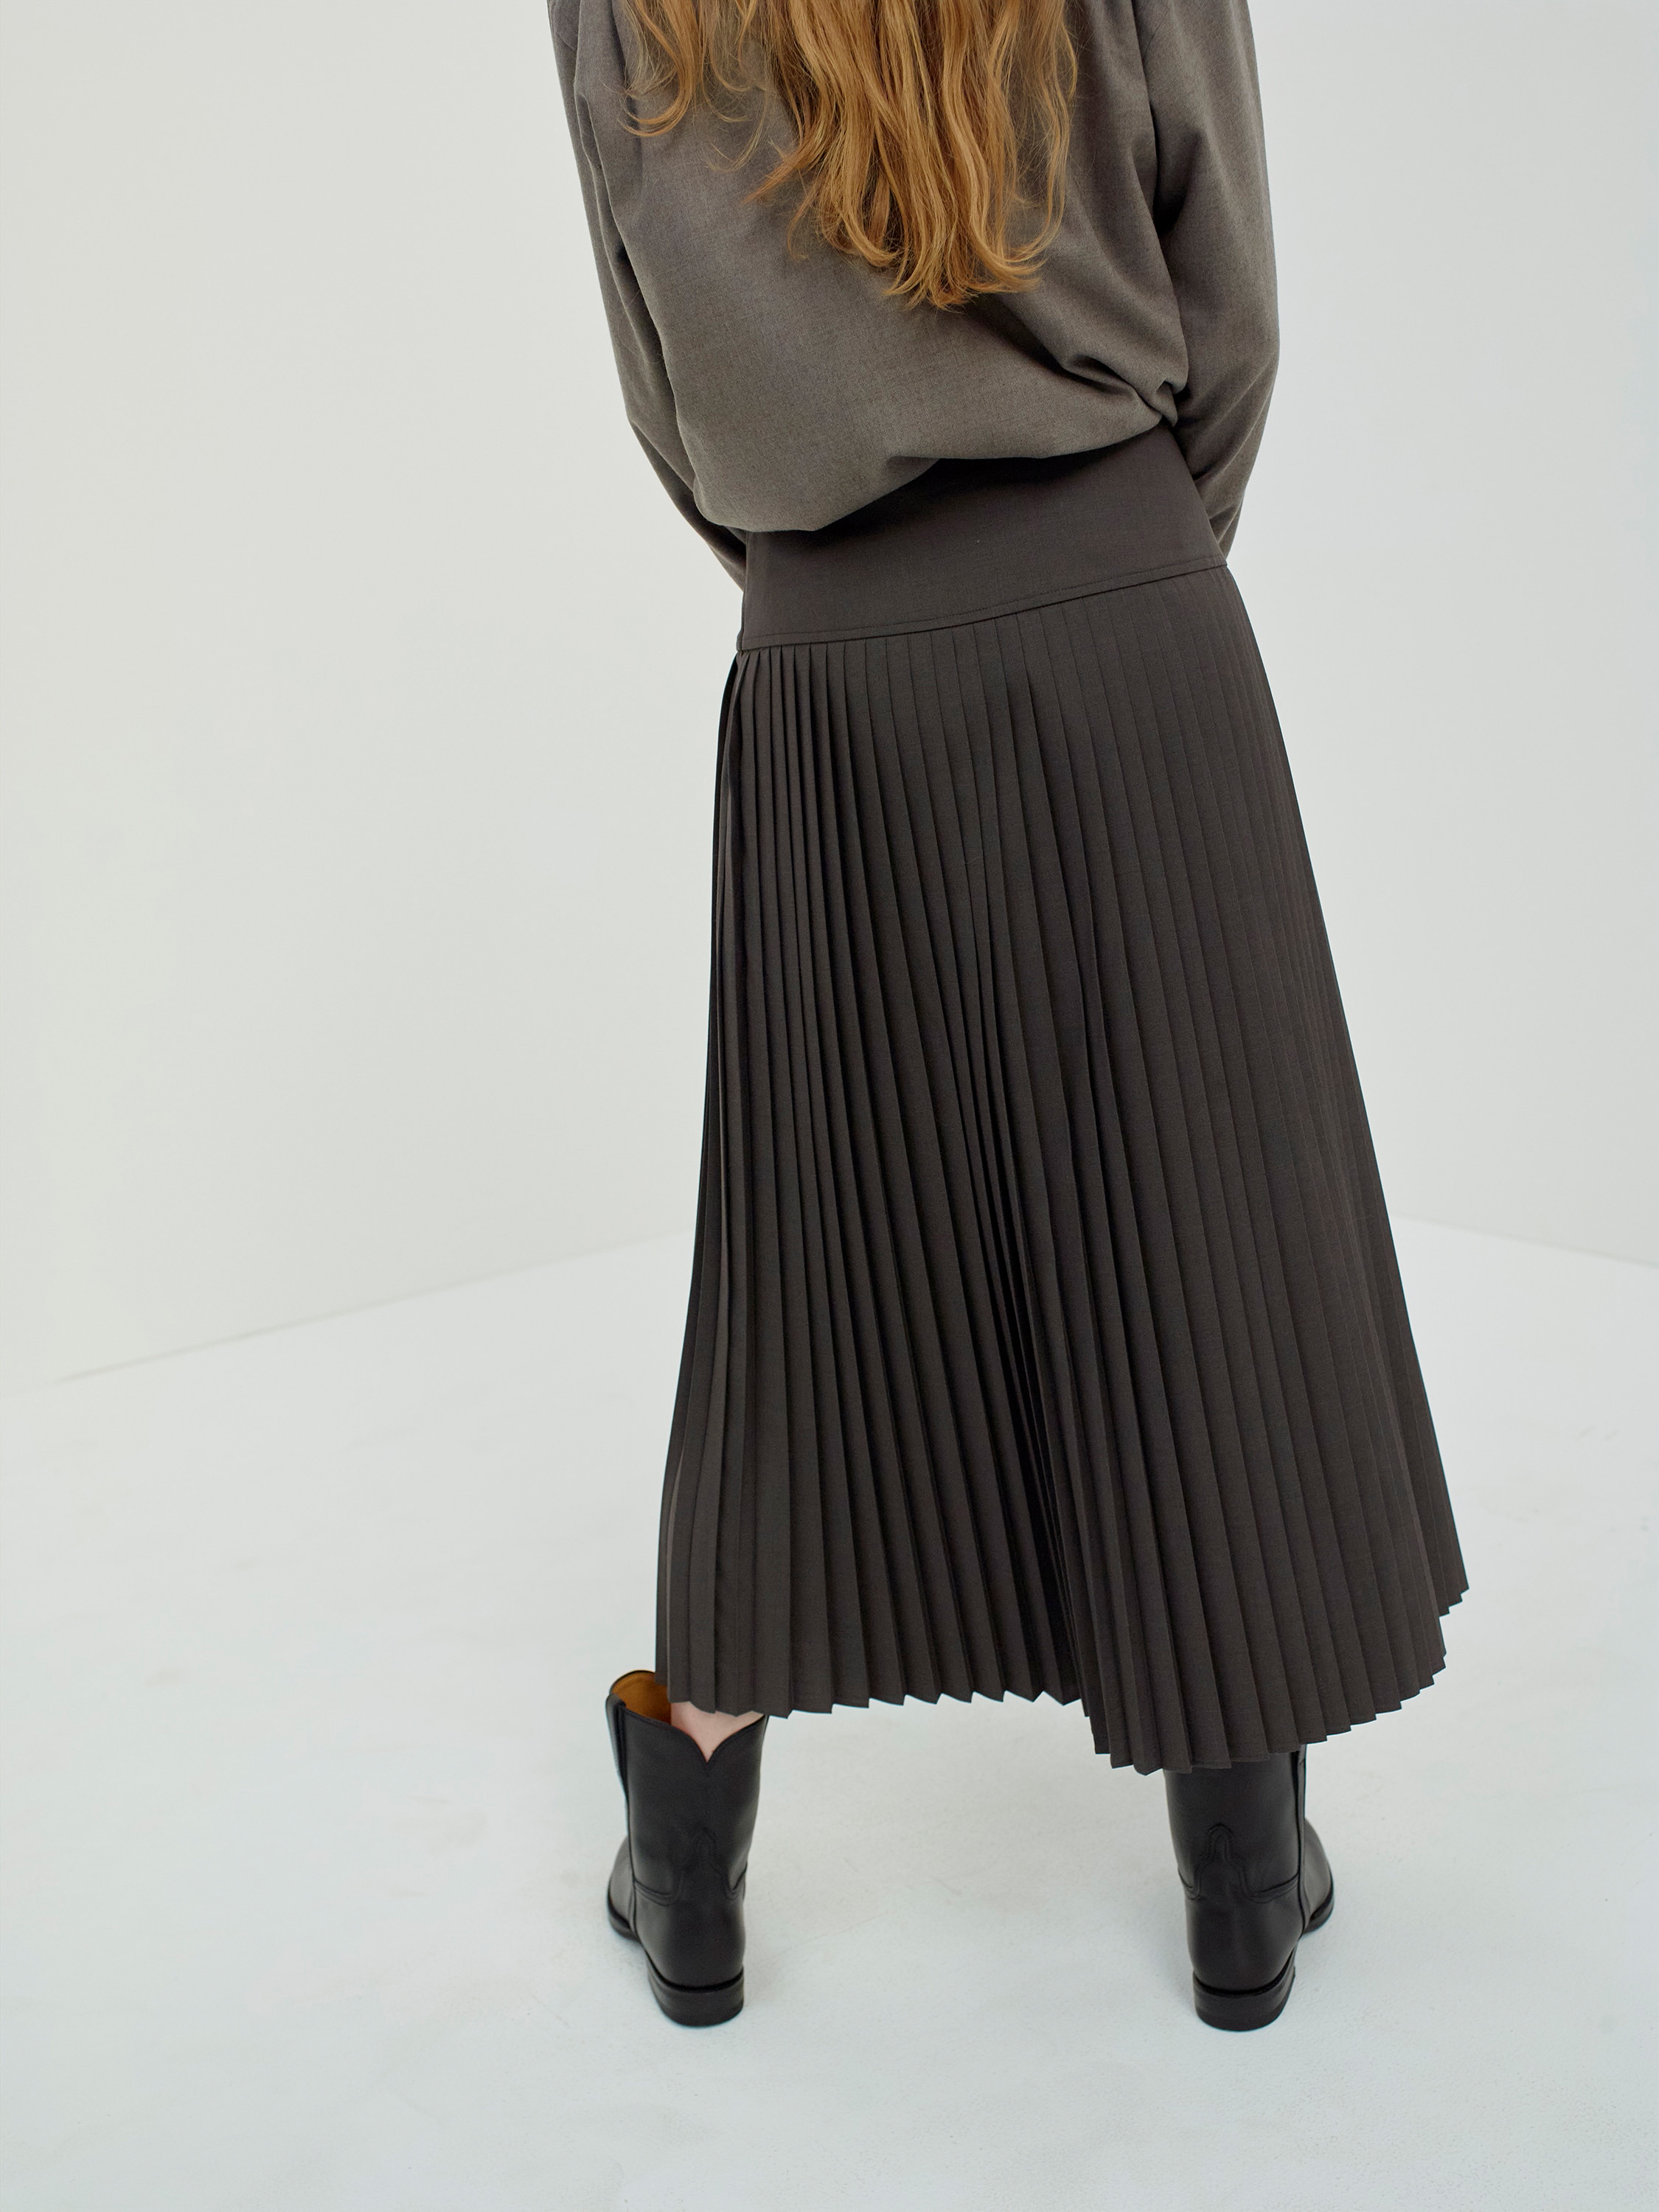 SUPER FINE TROPICAL WOOL PLEATED SKIRT 詳細画像 TOP BROWN 2